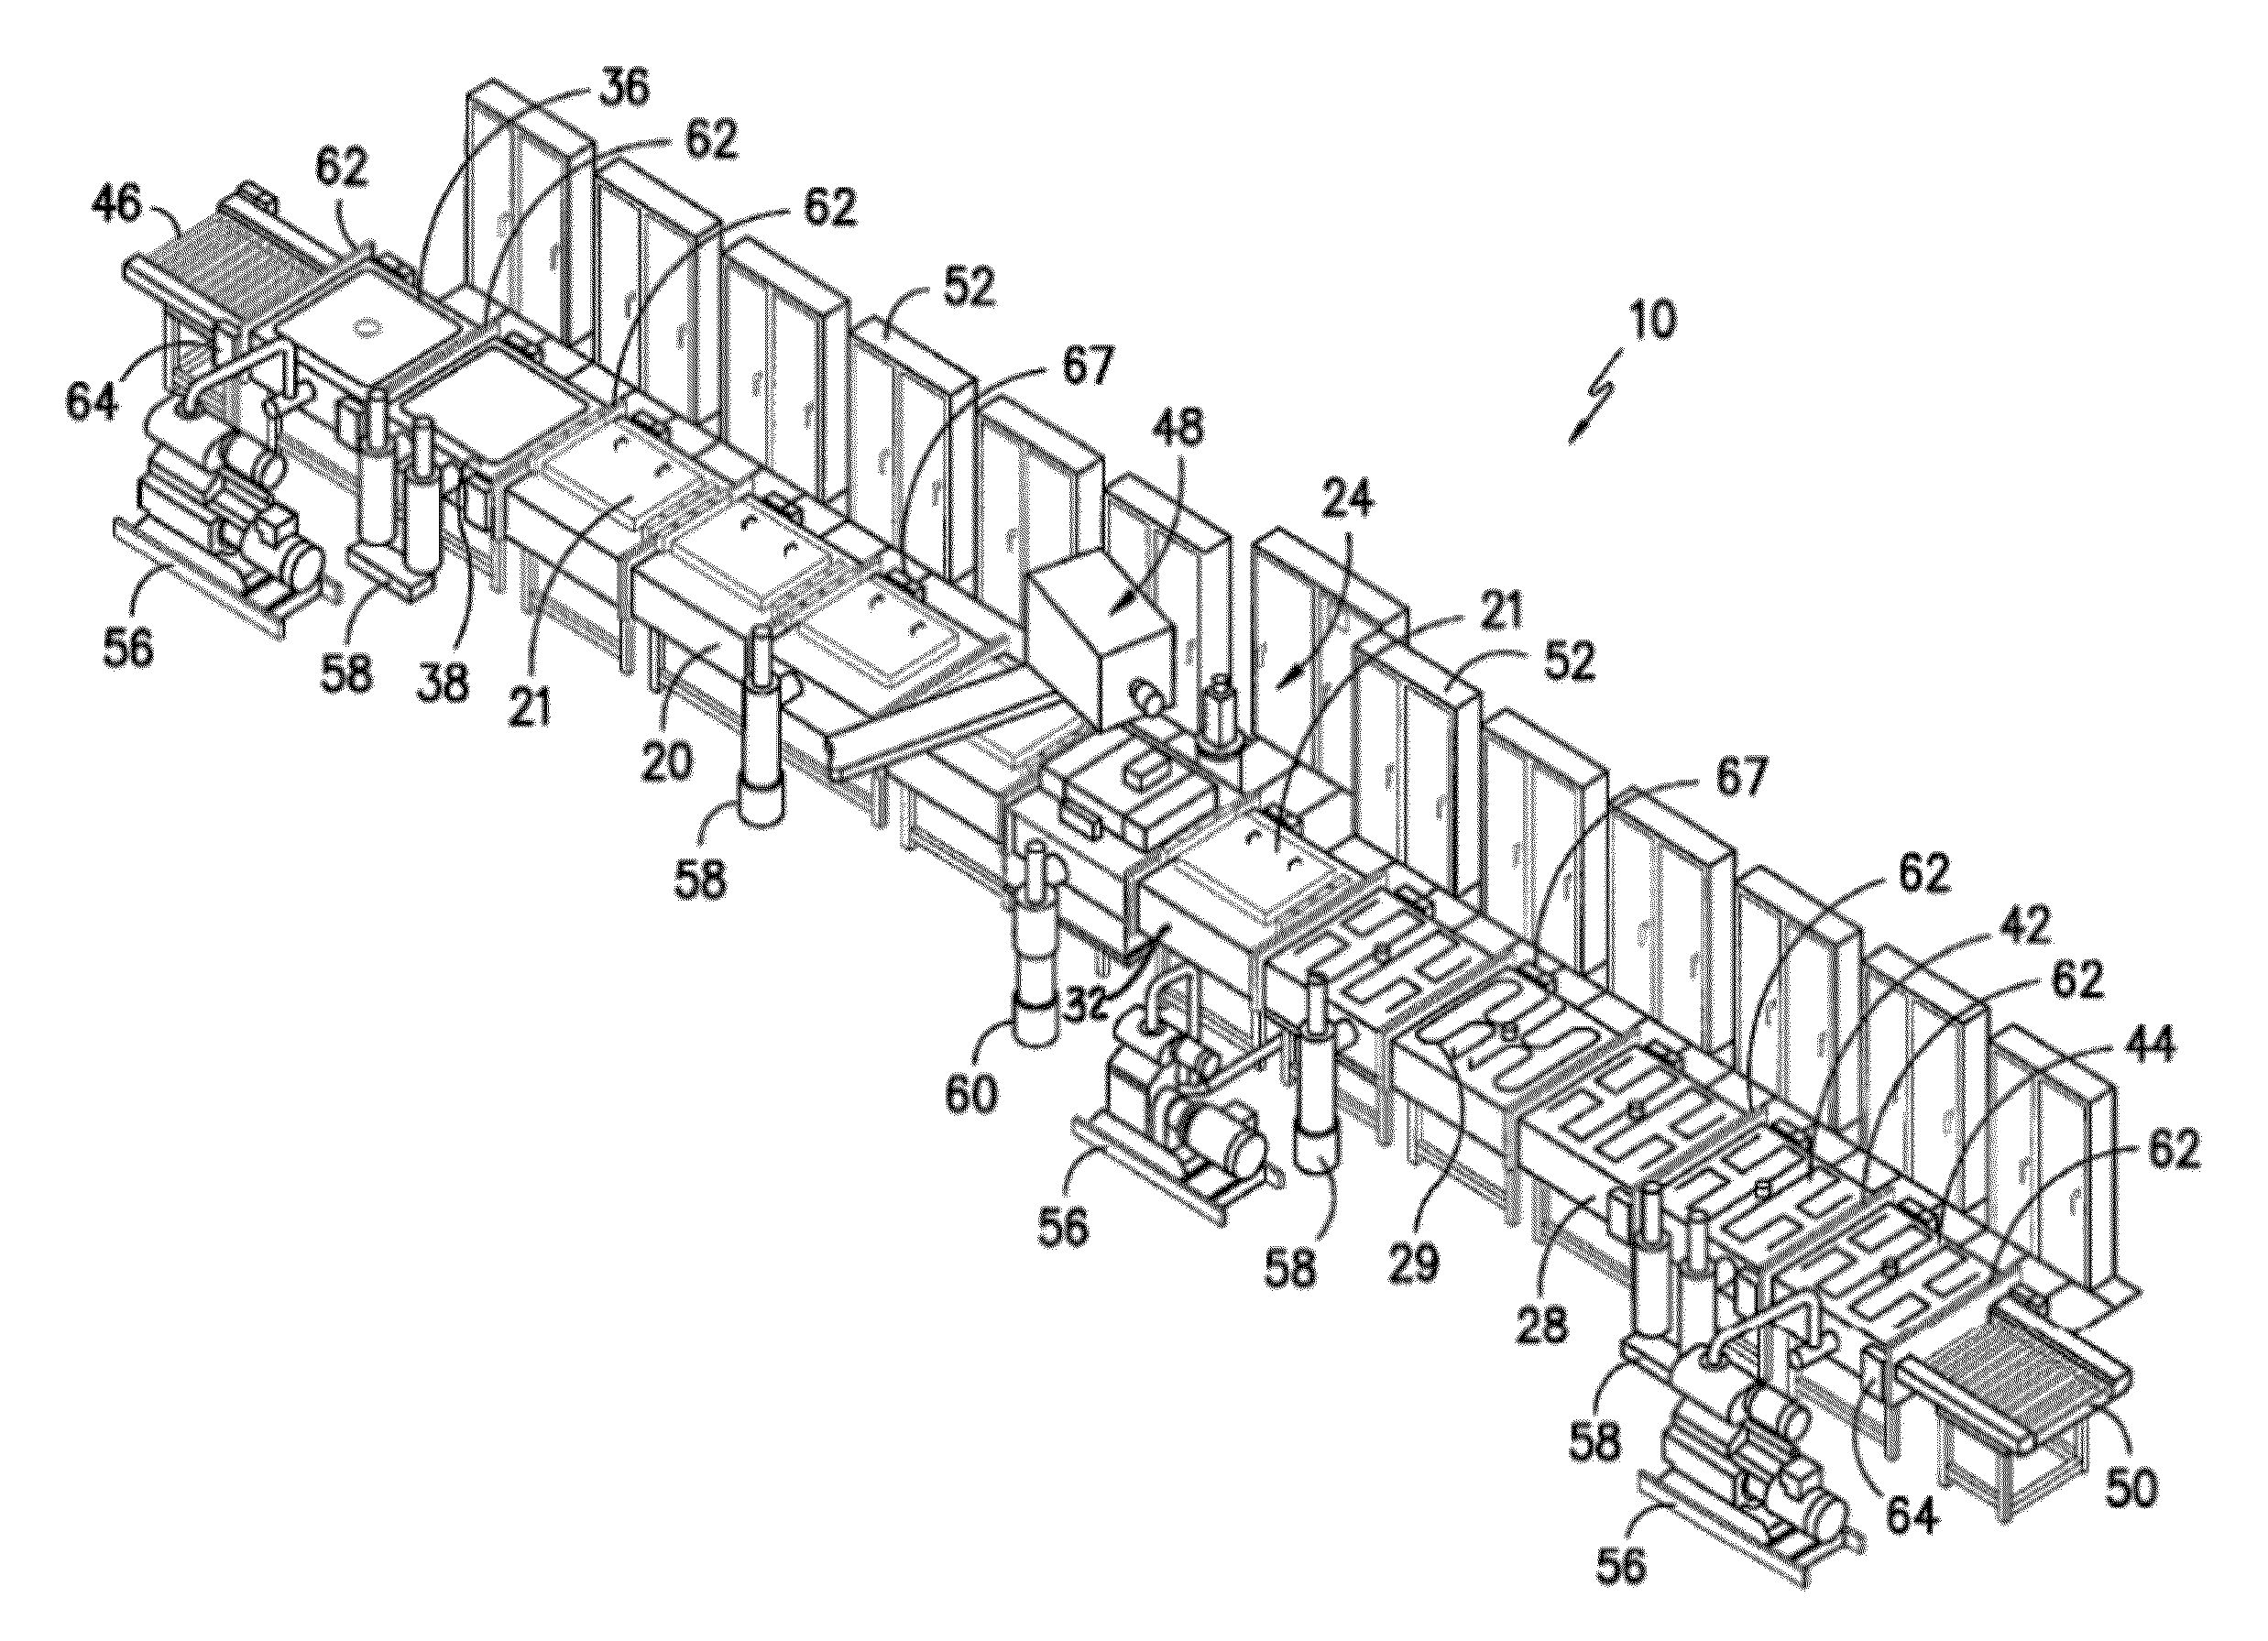 Dynamic system for variable heating or cooling of linearly conveyed substrates